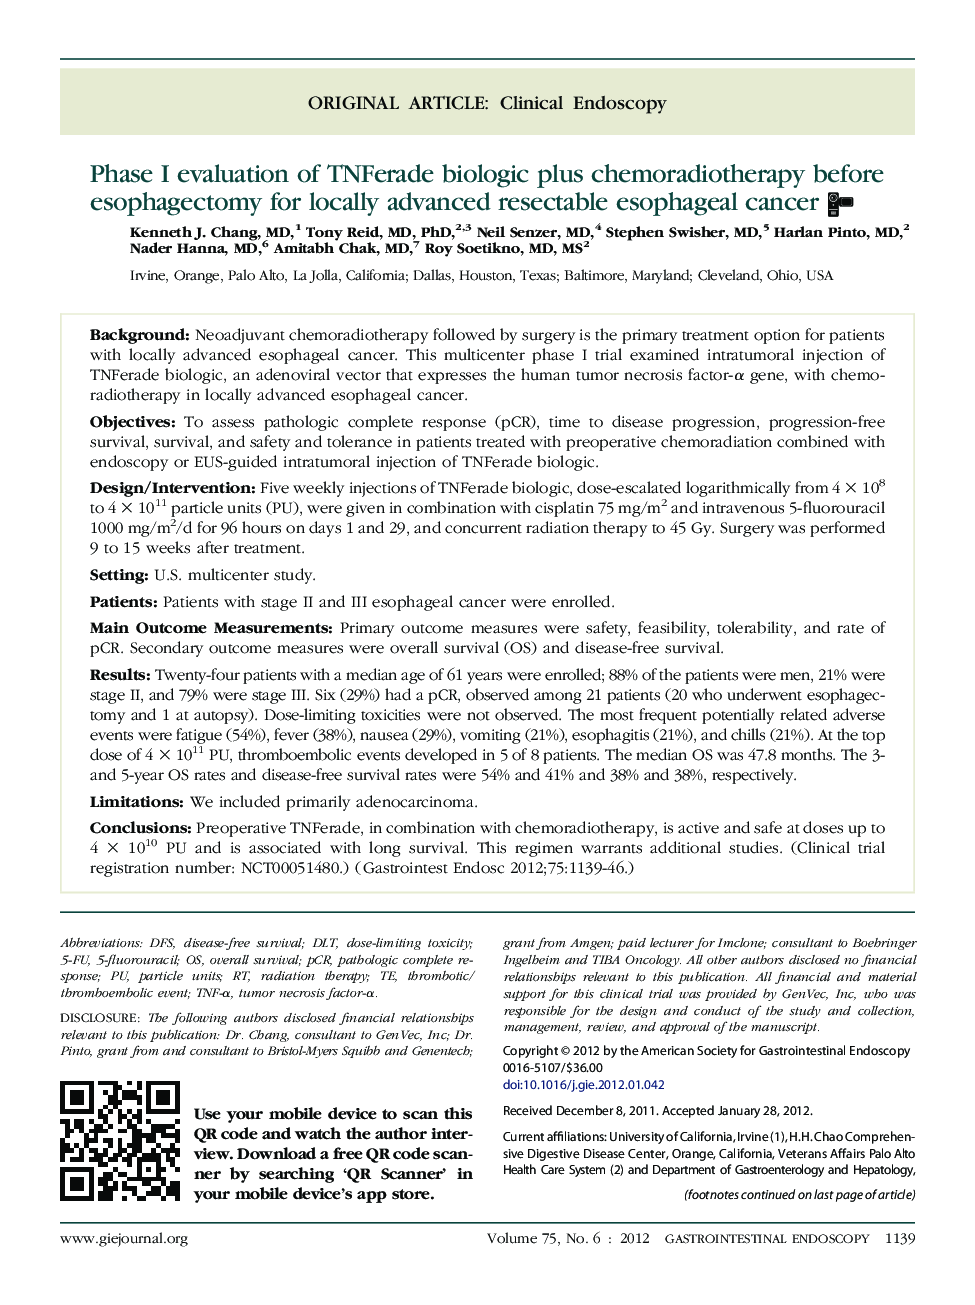 Phase I evaluation of TNFerade biologic plus chemoradiotherapy before esophagectomy for locally advanced resectable esophageal cancer